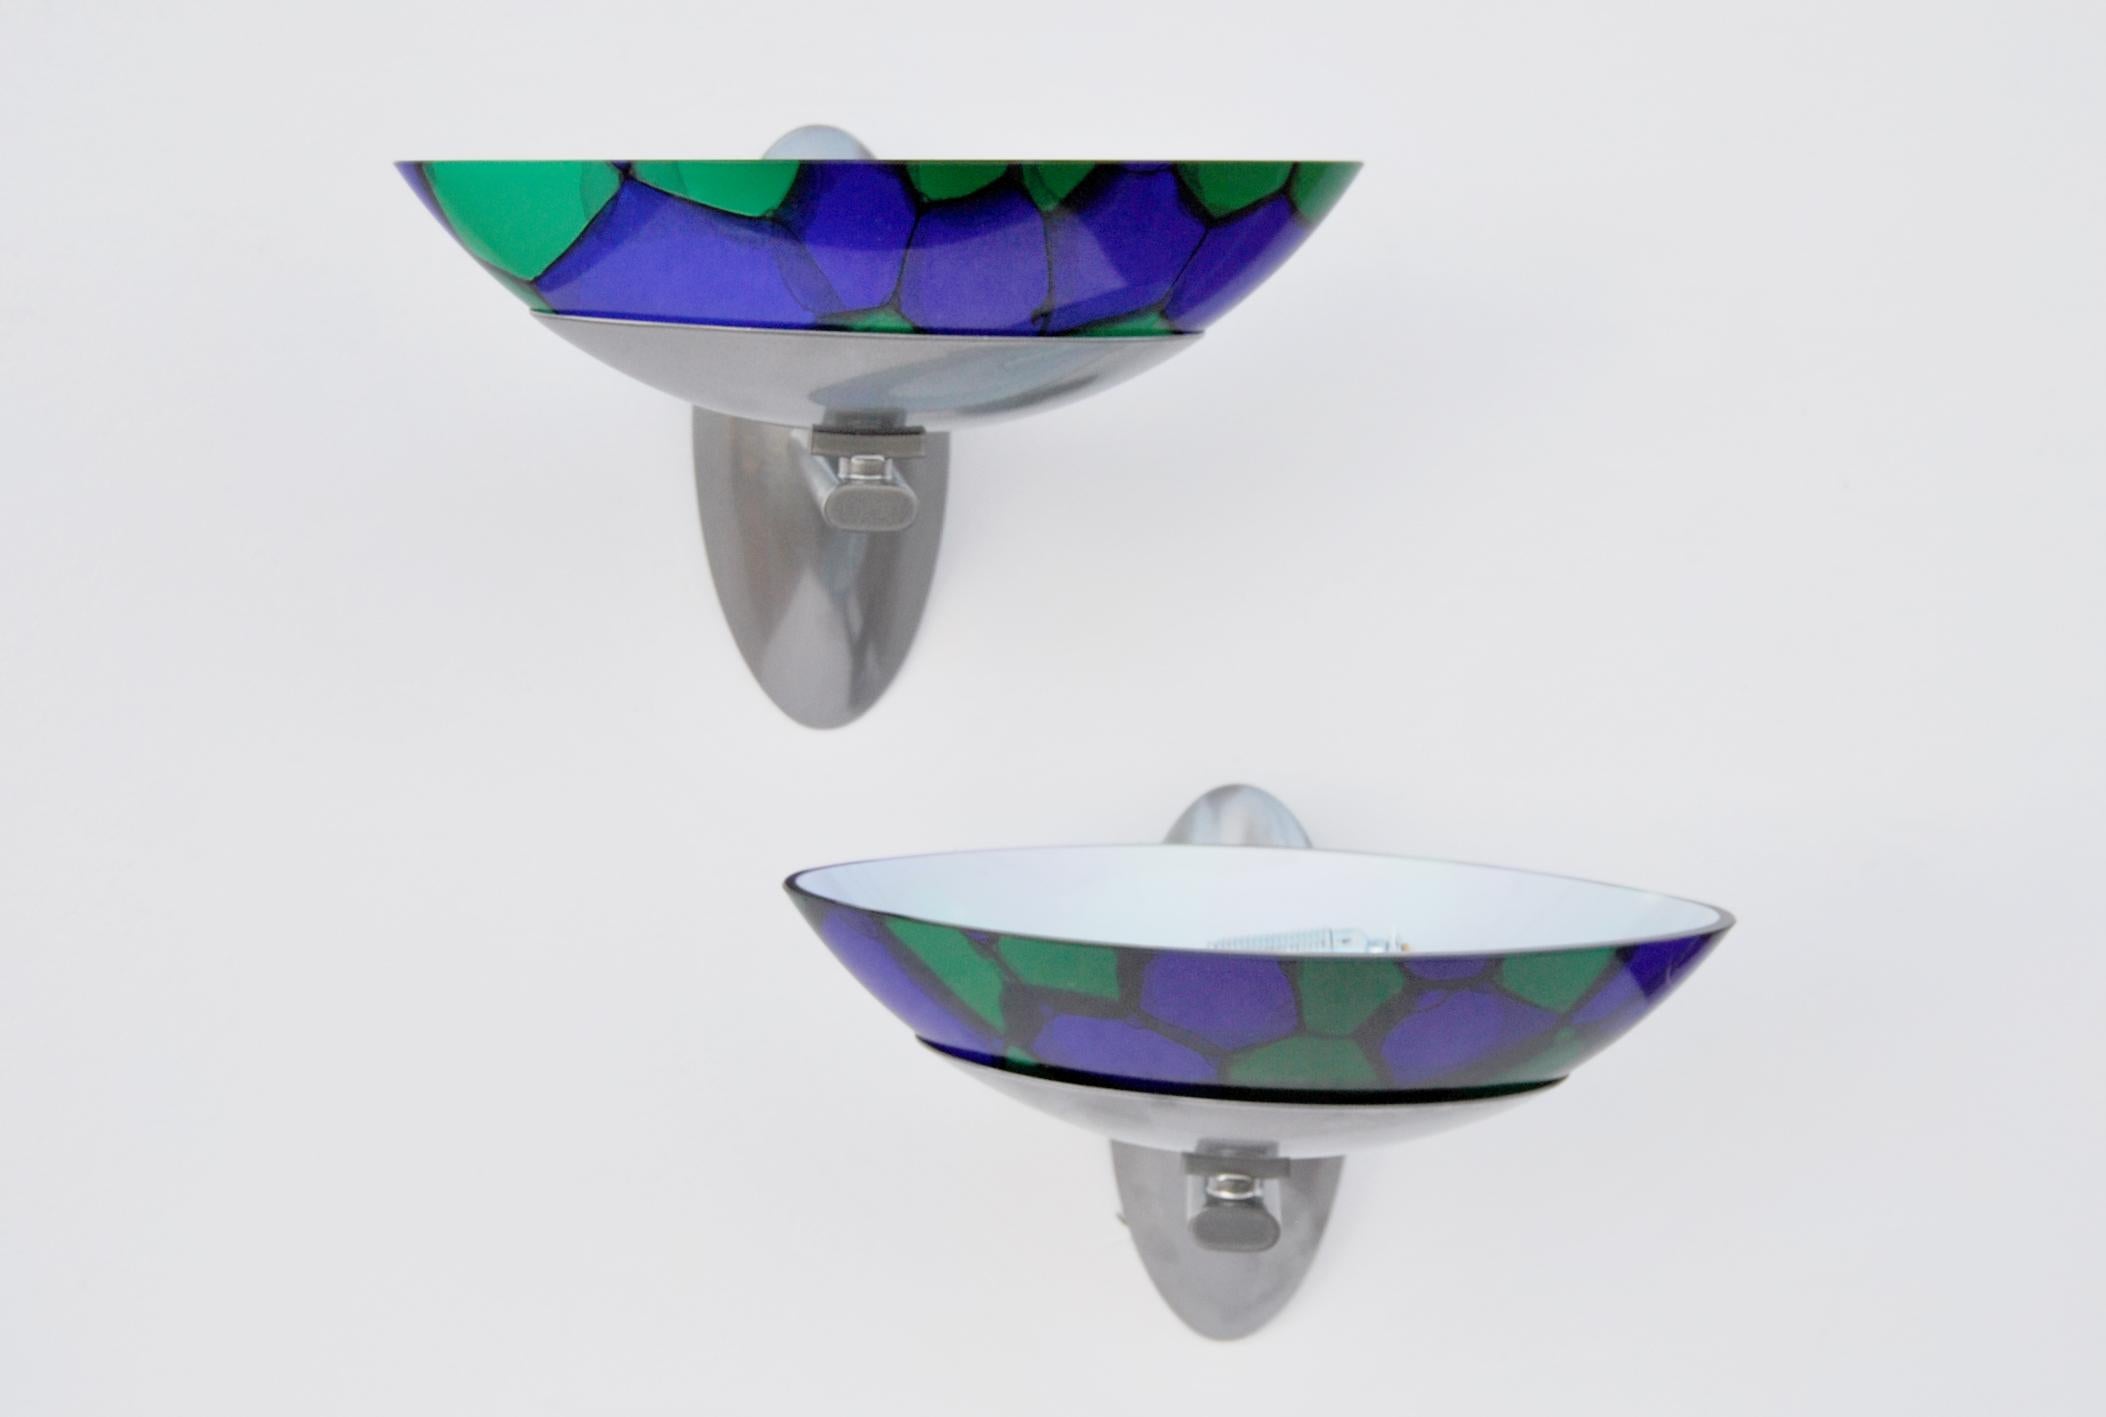 Pair of green and blue murano glass wall sconces by Ottavio Missoni for Zonca, 1980s.
The dark gray metal frame designed by Ottavio Missoni, and made by 